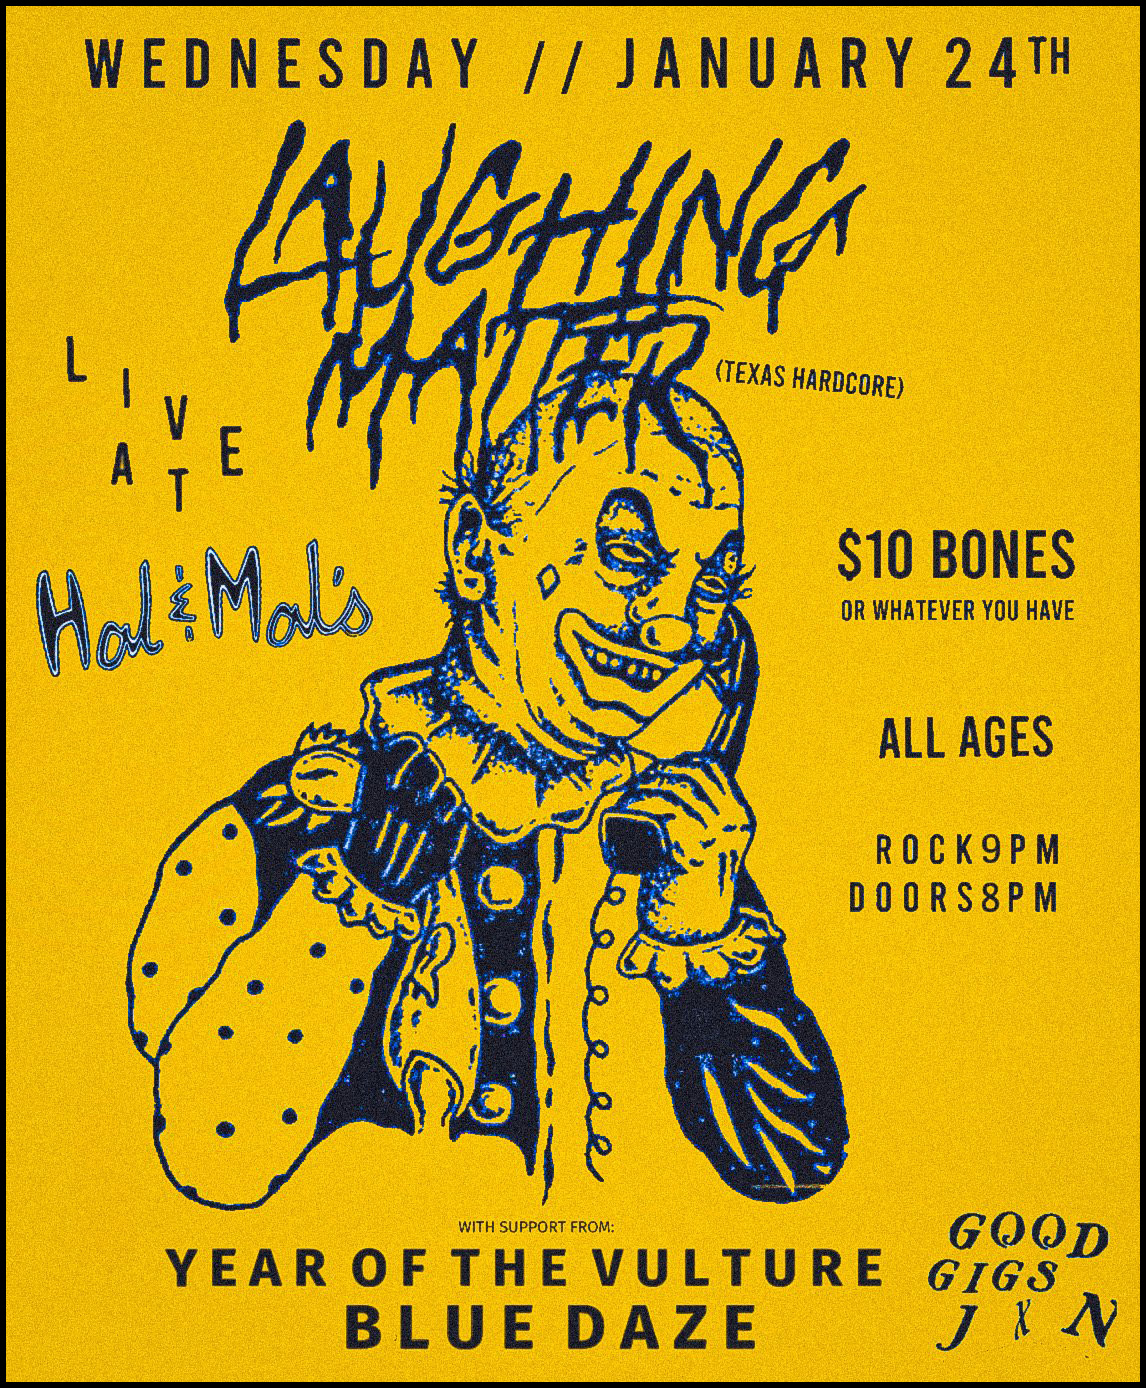 Laughing Matter with Year of the Vulture + Blue Daze